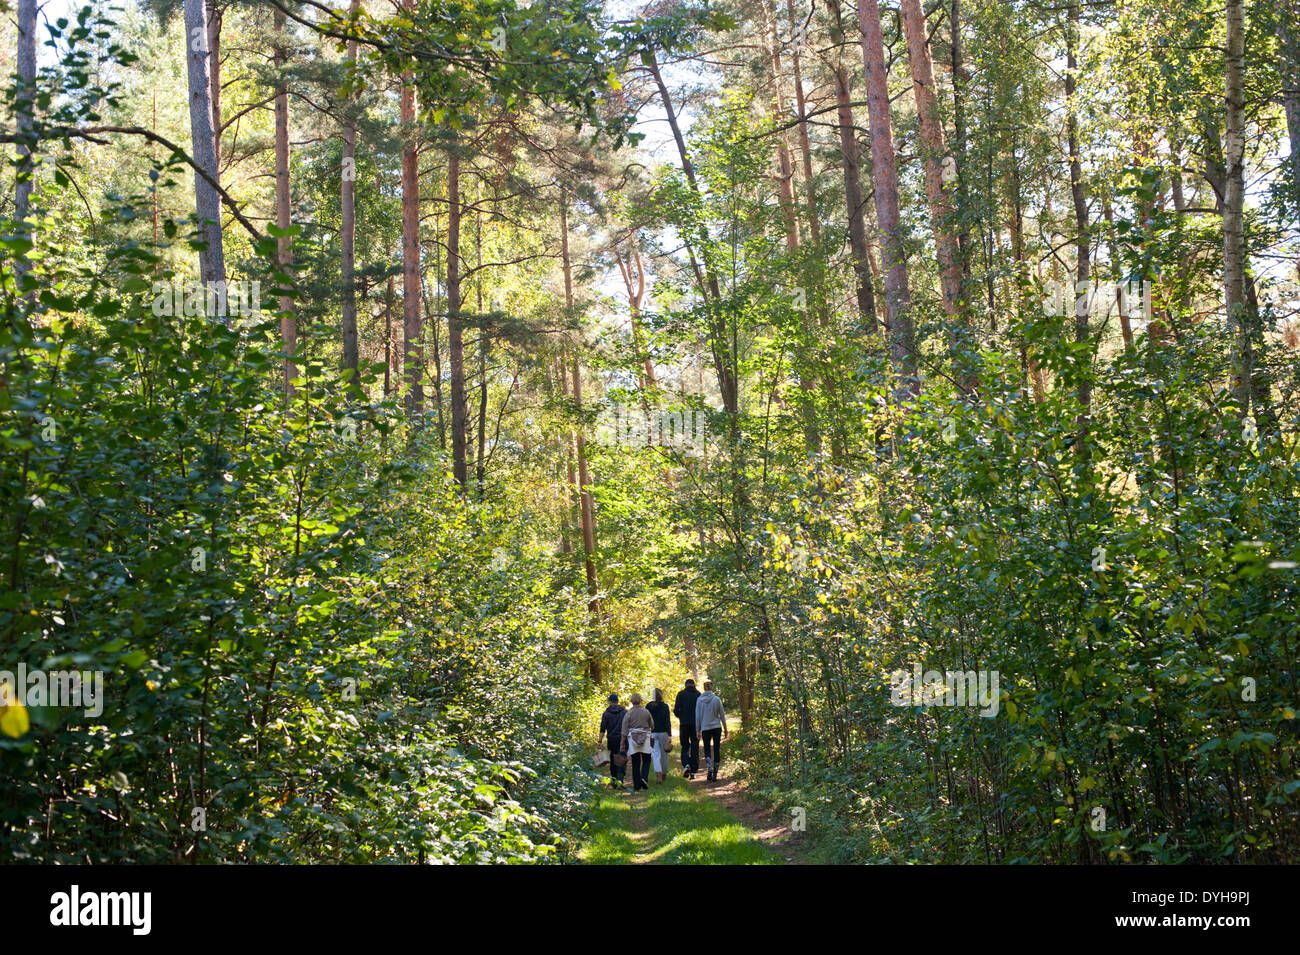 A group of people walking in a forest in Eastern Europe, collecting wild mushrooms during Spring / Summer. Stock Photo